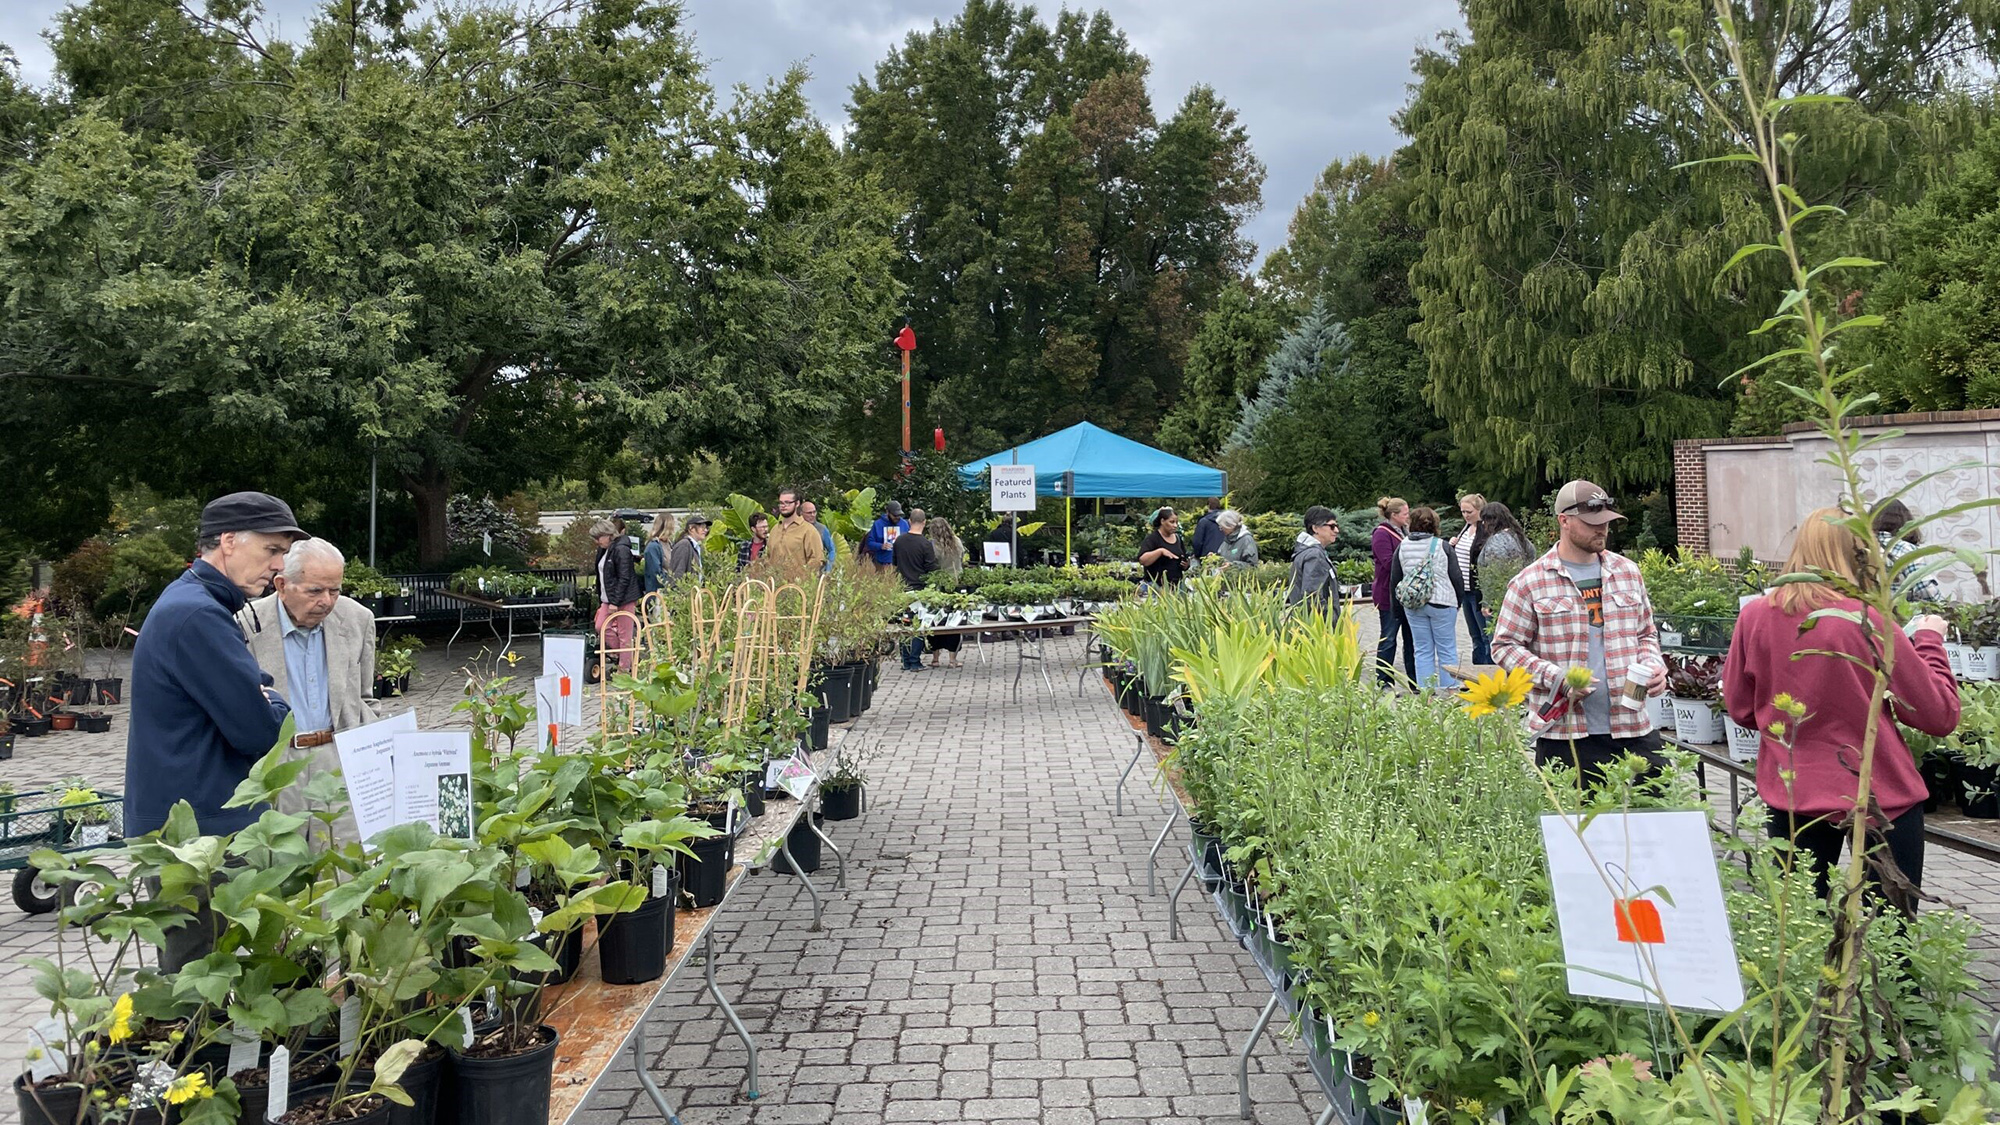 rows of tables with plants for sale outside at the UT Gardens, Knoxville